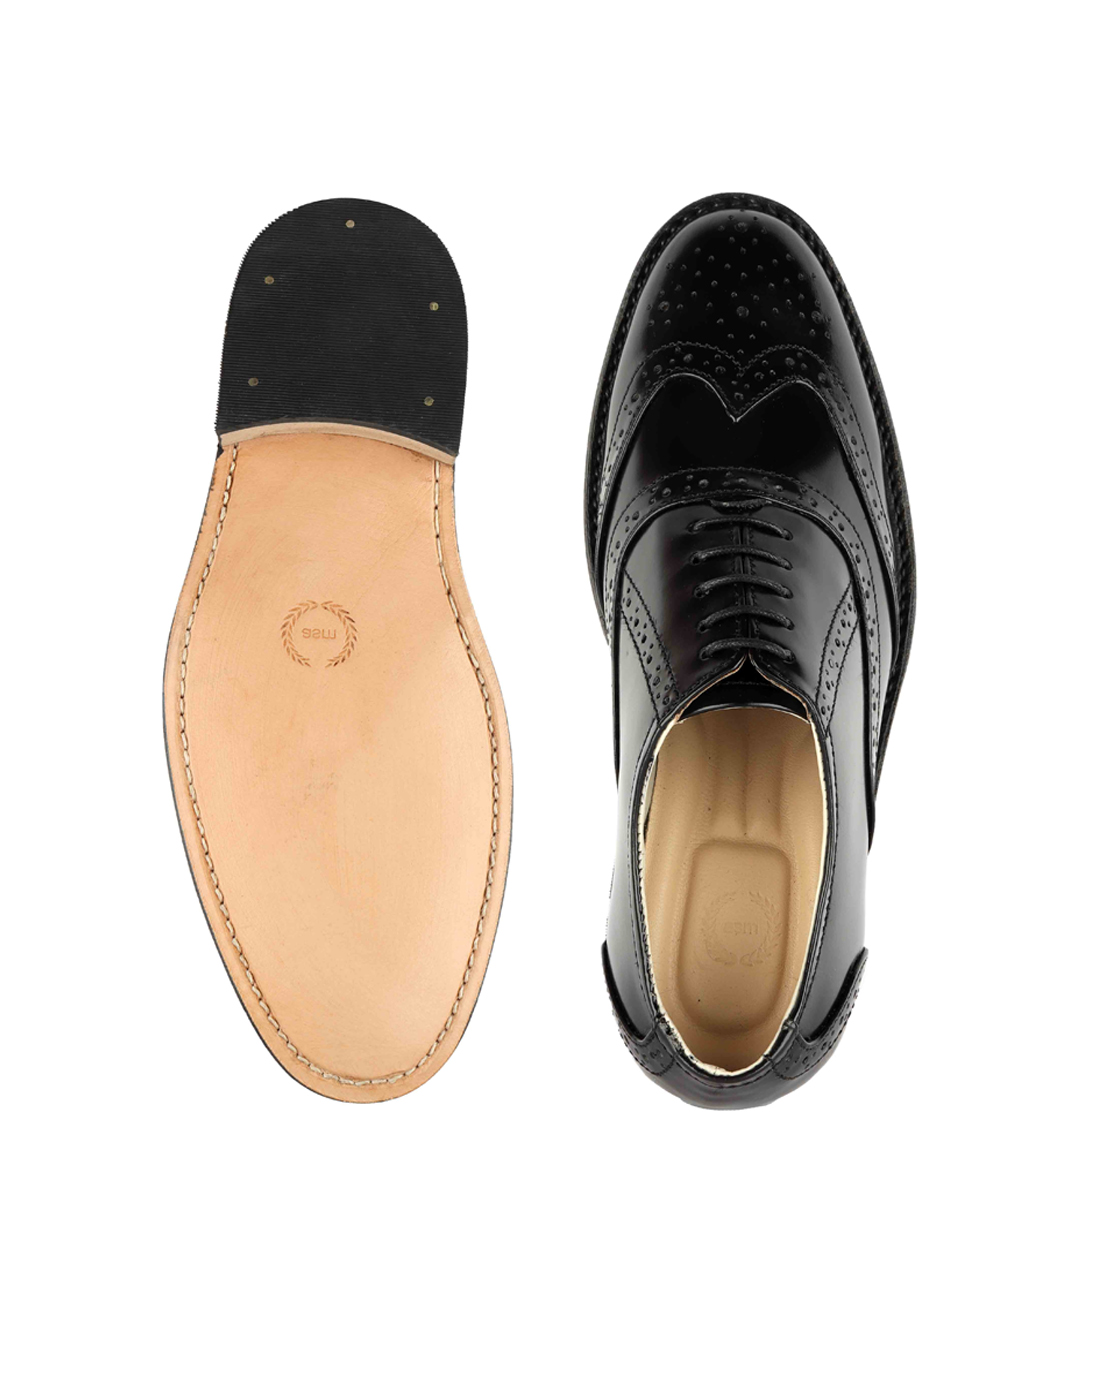 ASM Handmade Goodyear Welted Brogues Shoes. Size Available UK/India 4 to 15  Article : H101 | Agra Shoe Mart